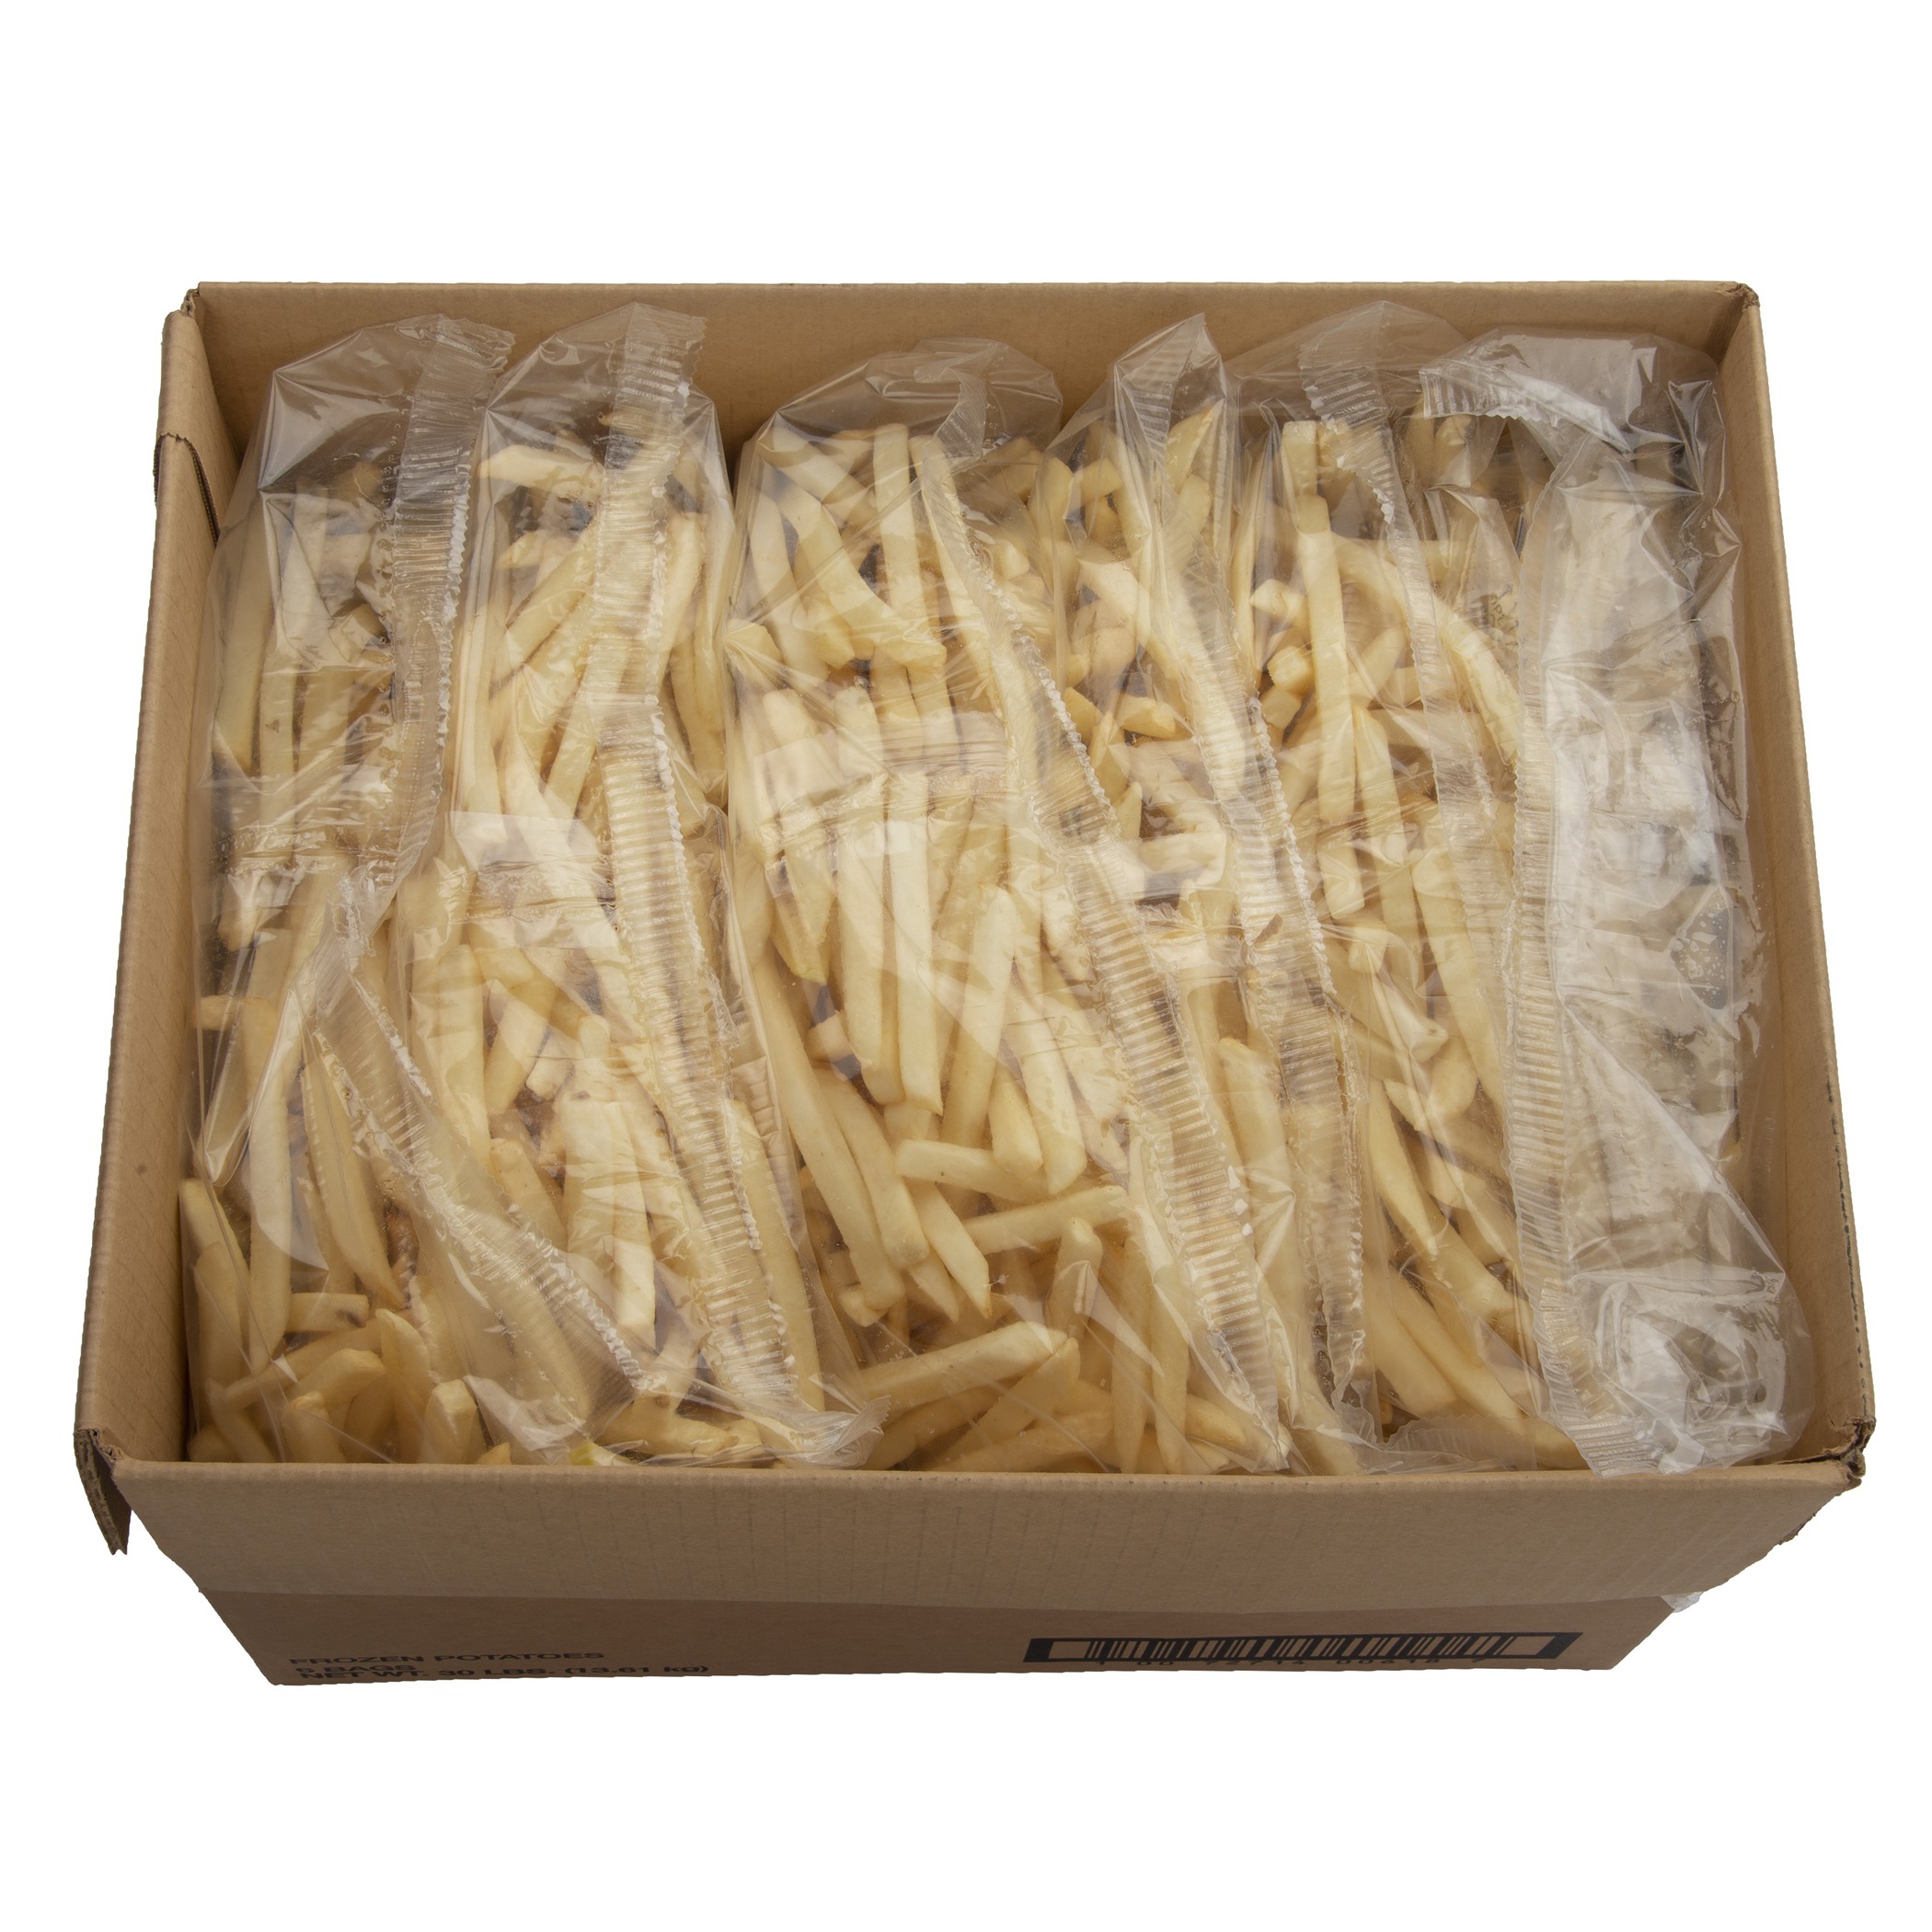 Ore-Ida Golden Crinkles French Fries, 8 lbs